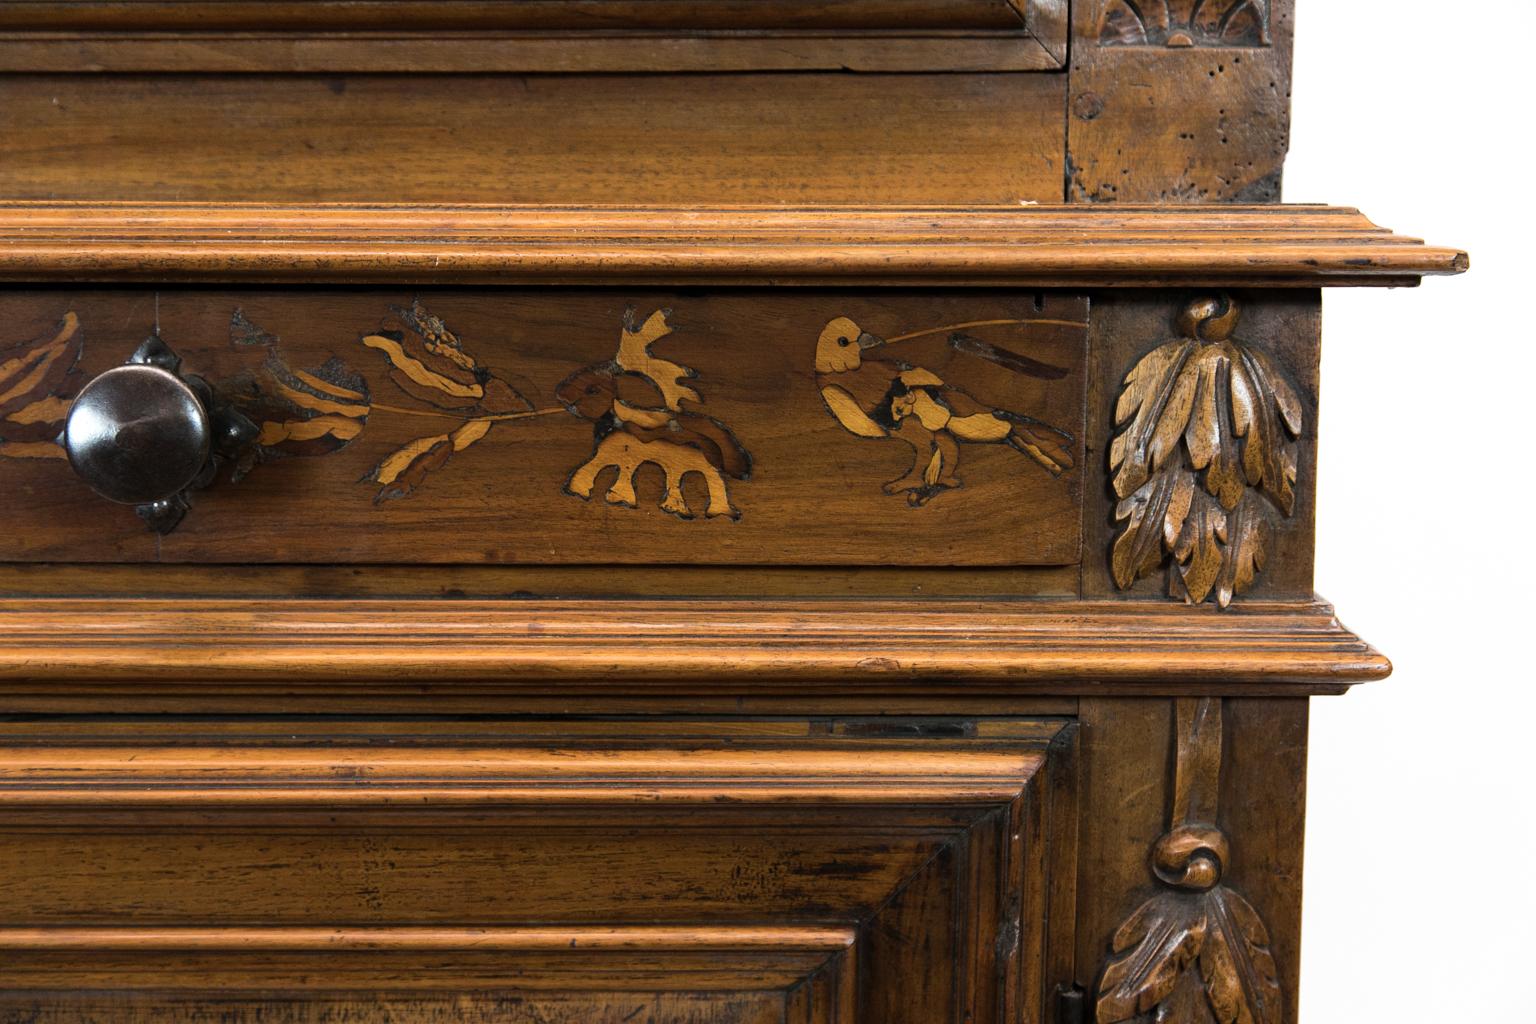 Inlaid French walnut cupboard, with frieze that is inlaid with birds and floral patterns. The doors are inlaid with stylized ducks holding malachite leaves. The upper door is surrounded by incised stylized acanthus carvings. The lower door is